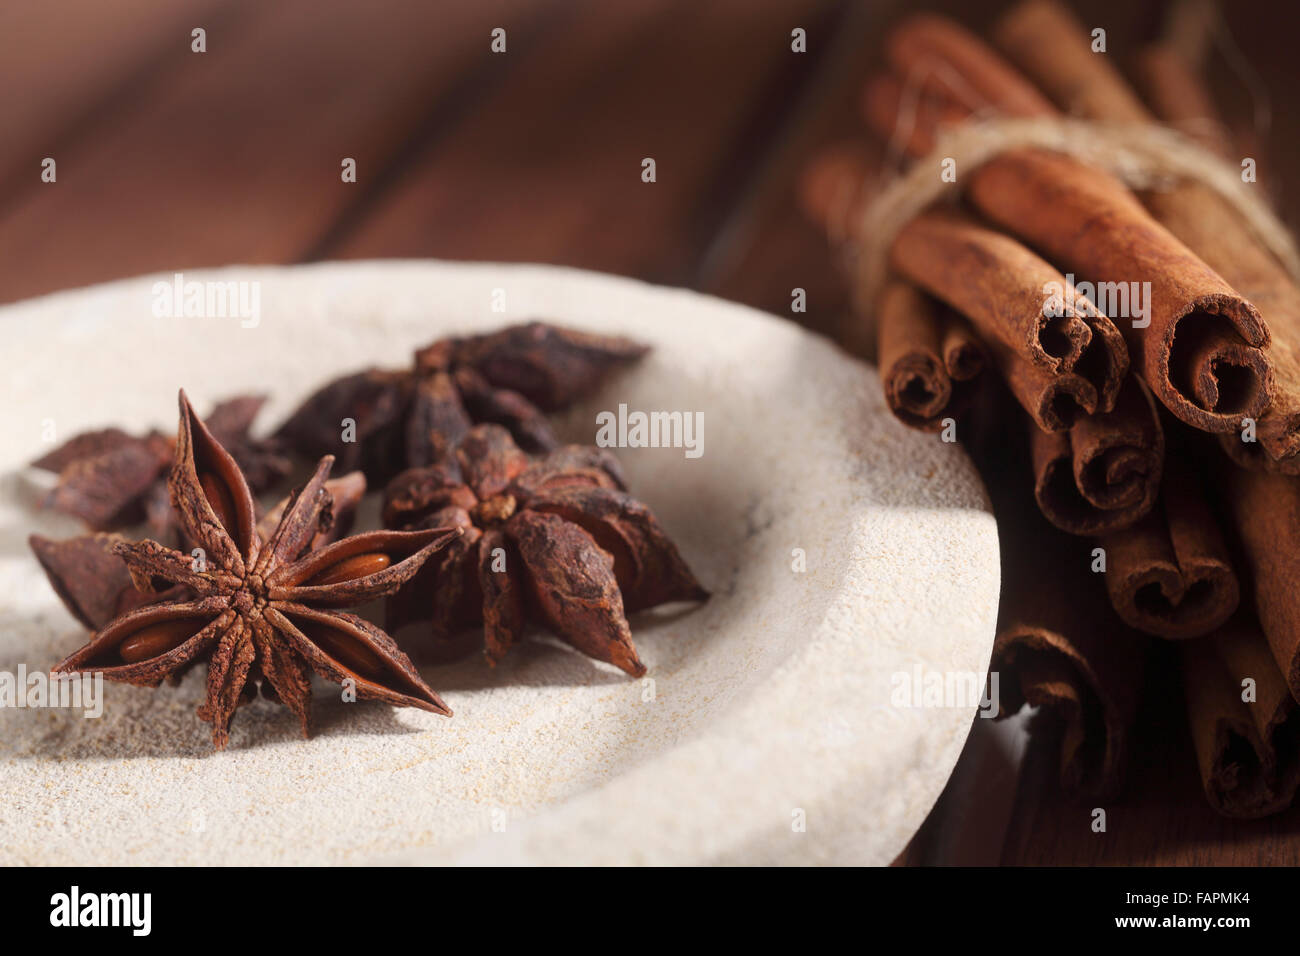 Star Anise fruit (Pimpinella anisum) for cooking. Stock Photo